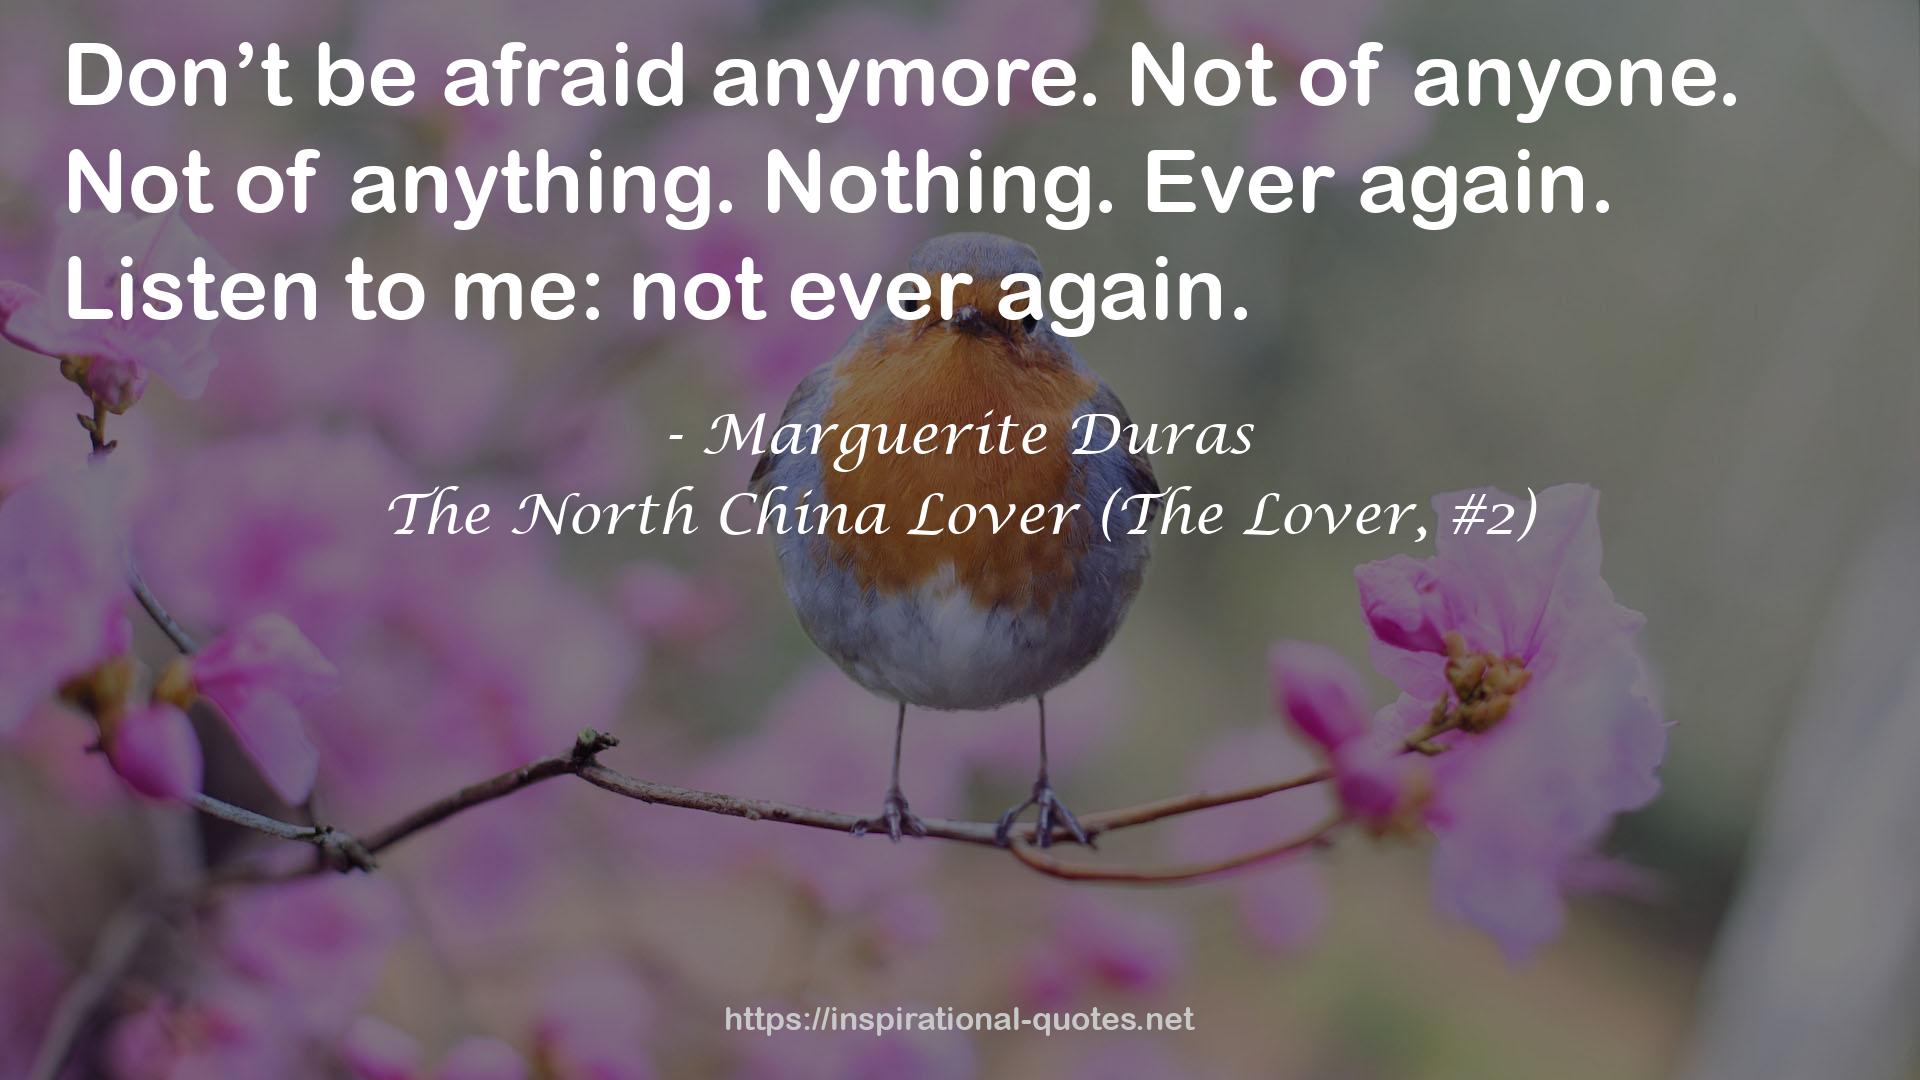 The North China Lover (The Lover, #2) QUOTES